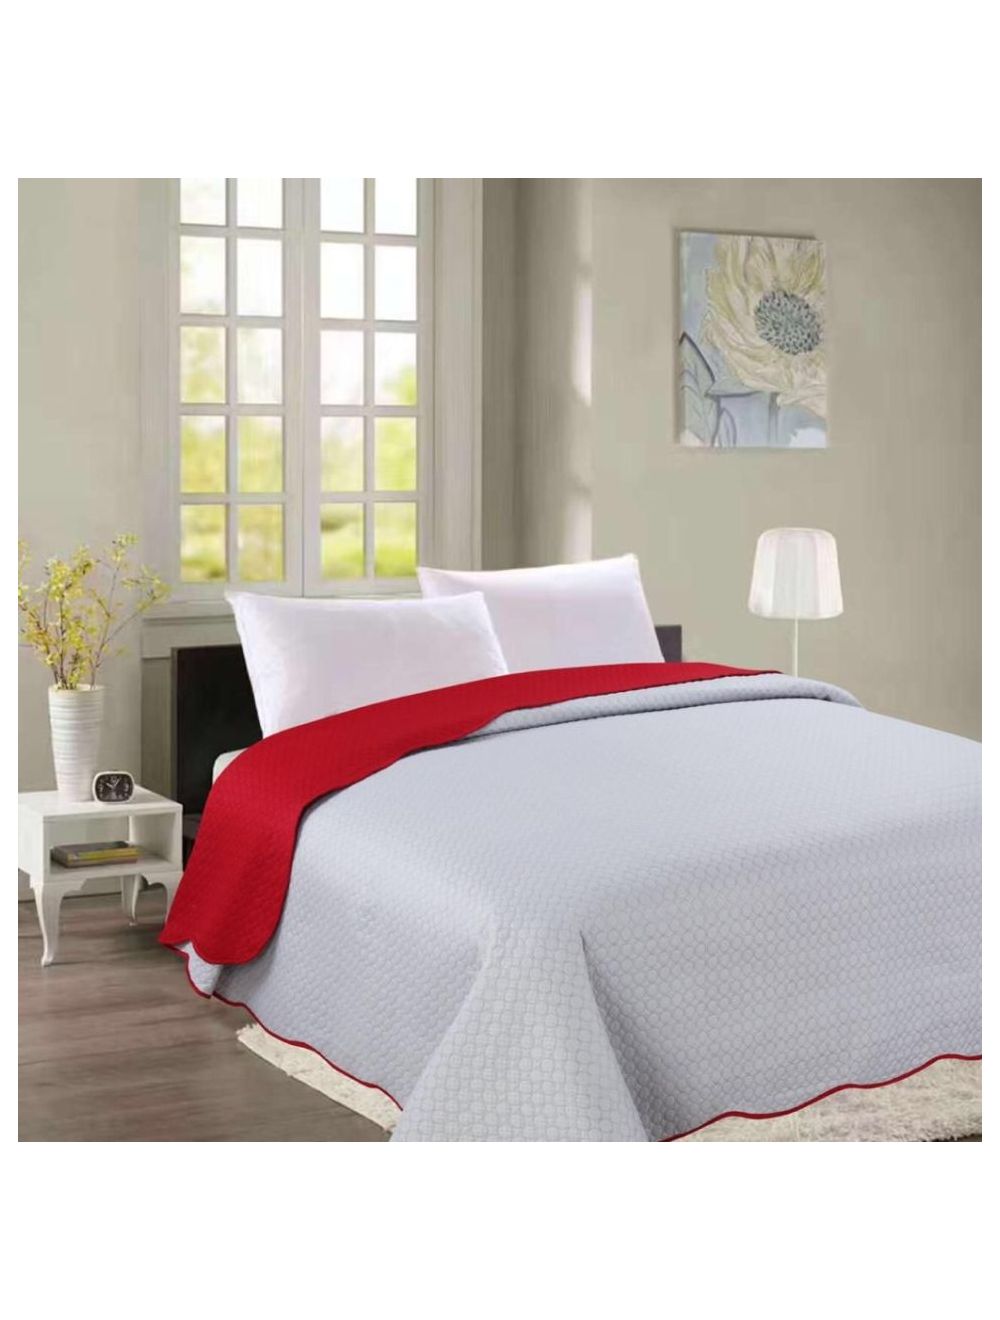 Rahalife 3 Piece Reversible Laser Quilted Bedspread/Quilt Set Polyester Grey/Maroon King-RLBS/K3/22